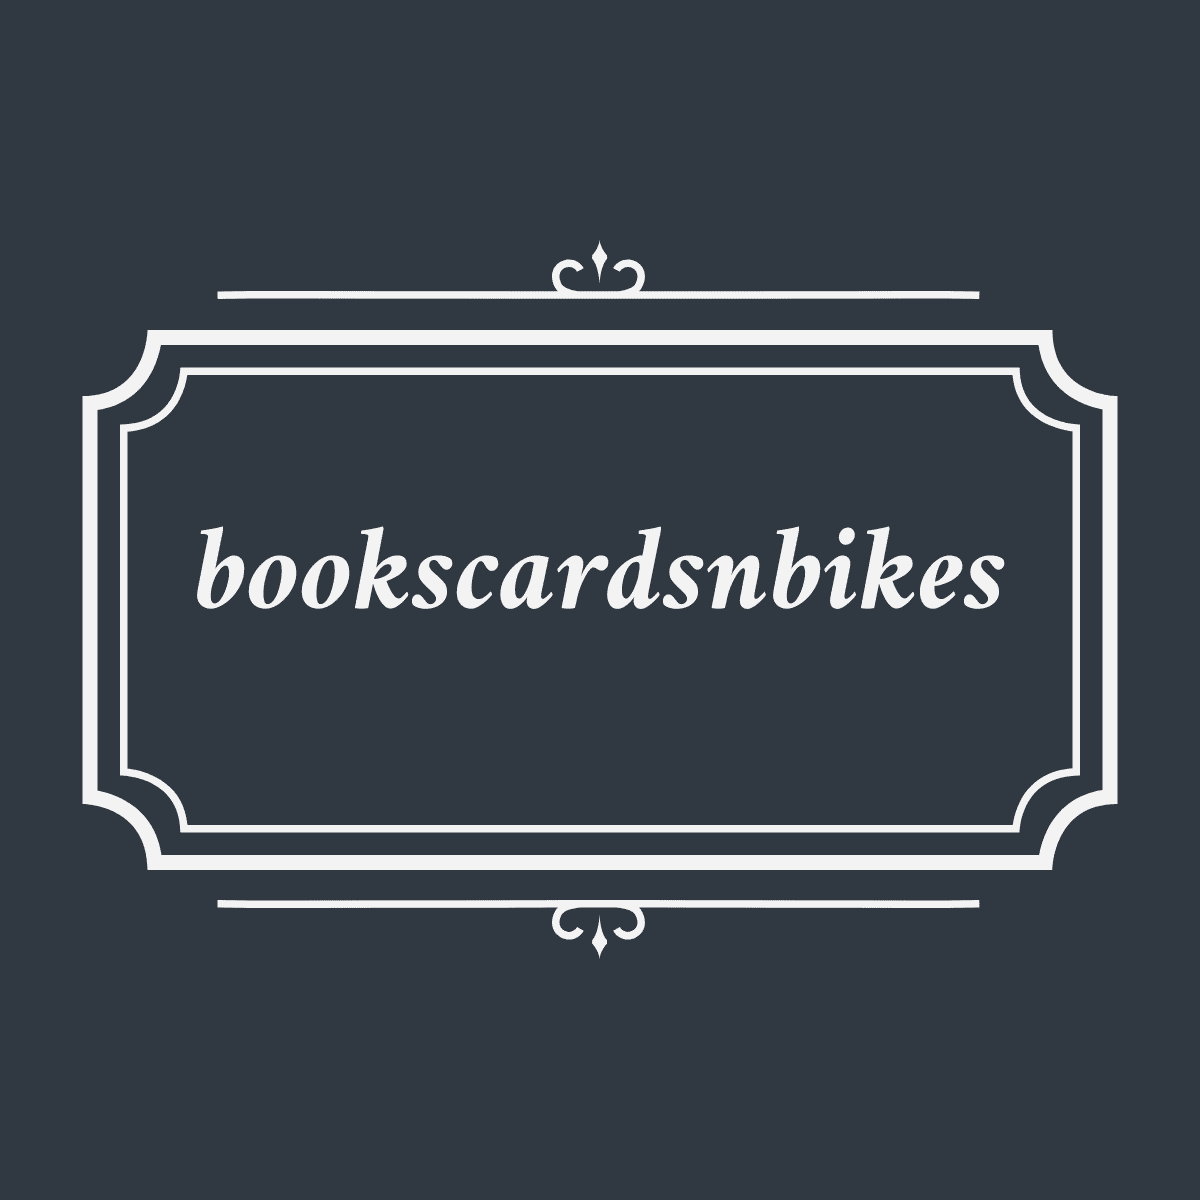 Books Cards N Bikes Gift Card [Various Sizes] BooksCardsNBikes